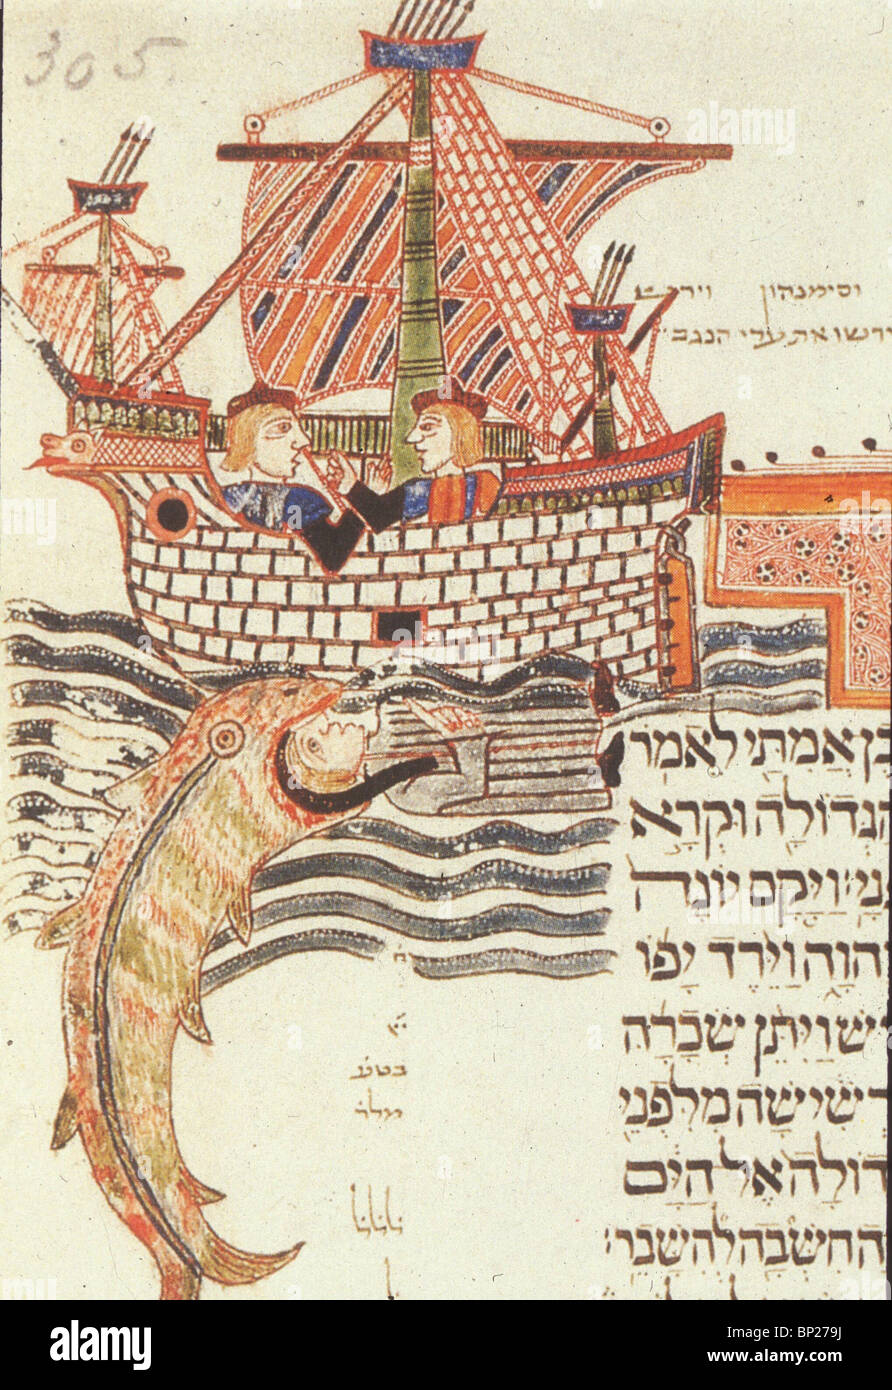 1558. JONAH BEING THROWN TO THE FISH, ILLUSTRATION FROM THE 15TH.C. ILLUMINATED KENNICOTT BIBLE Stock Photo